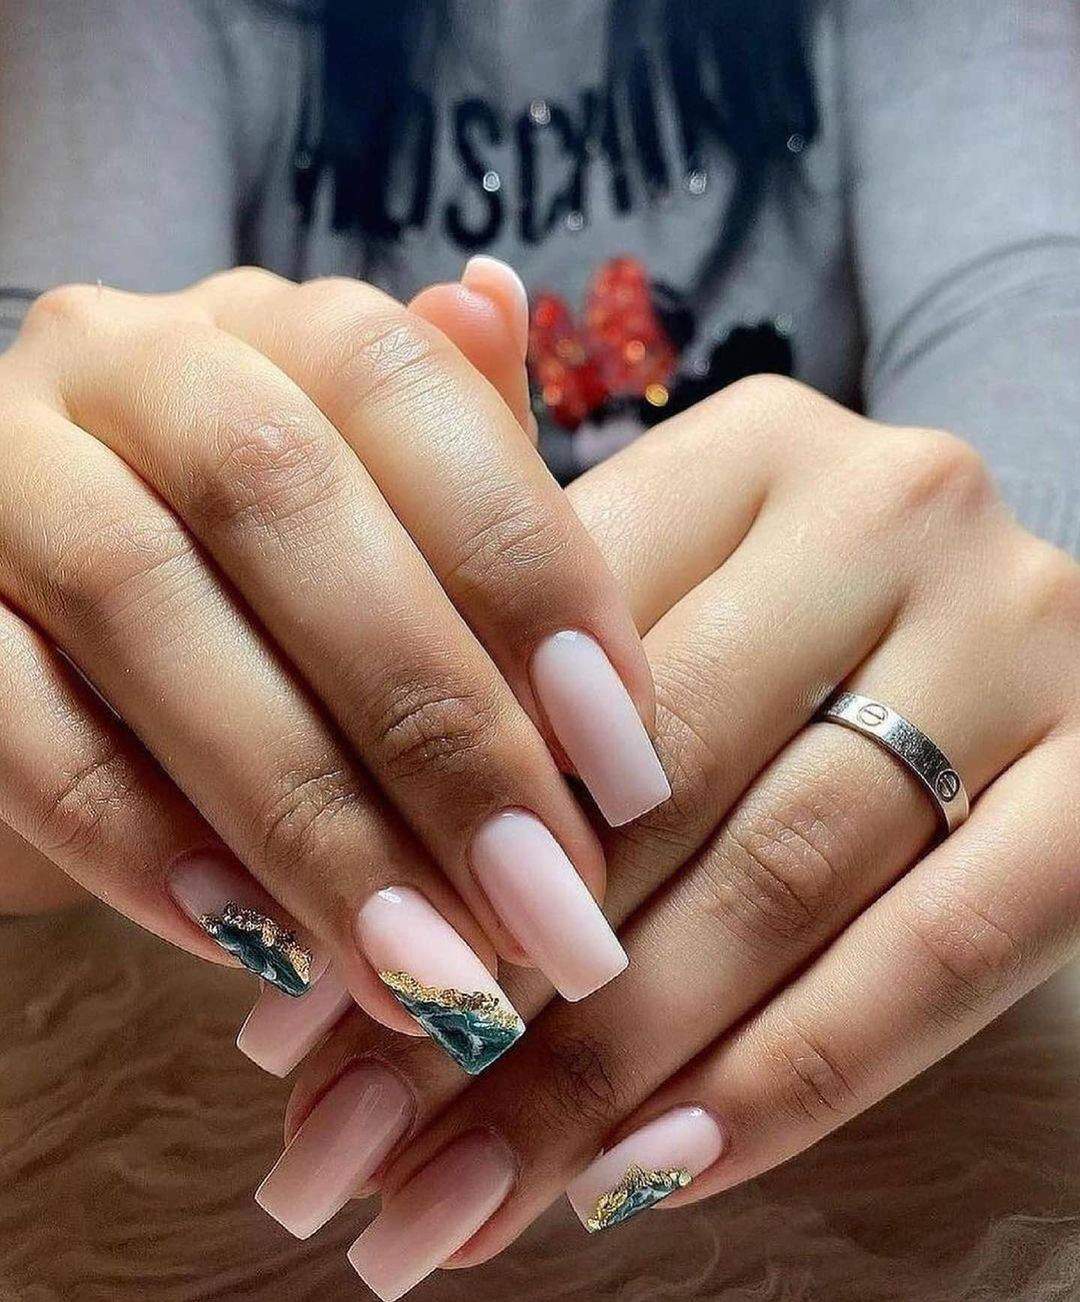 35 Cute Summer Nails To Rock For Women In 2021 images 28